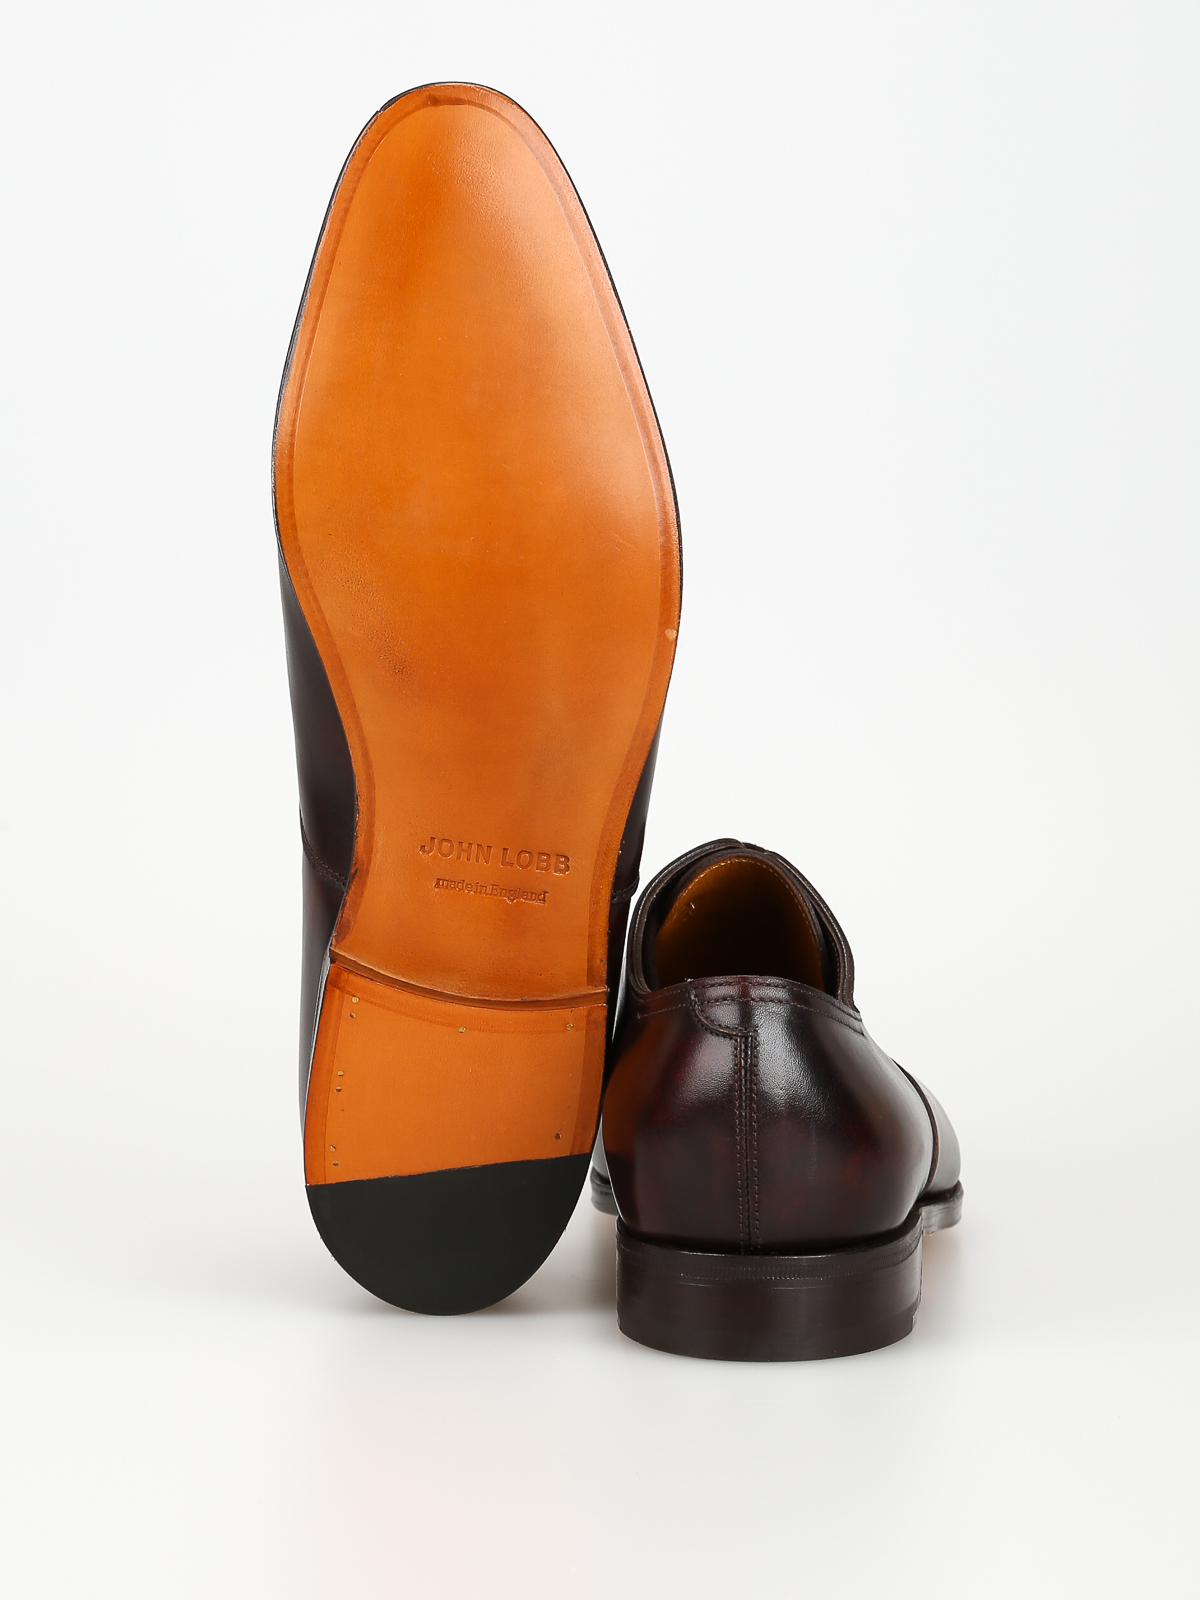 Classic shoes John Lobb - City II brown calf leather Oxford shoes ...